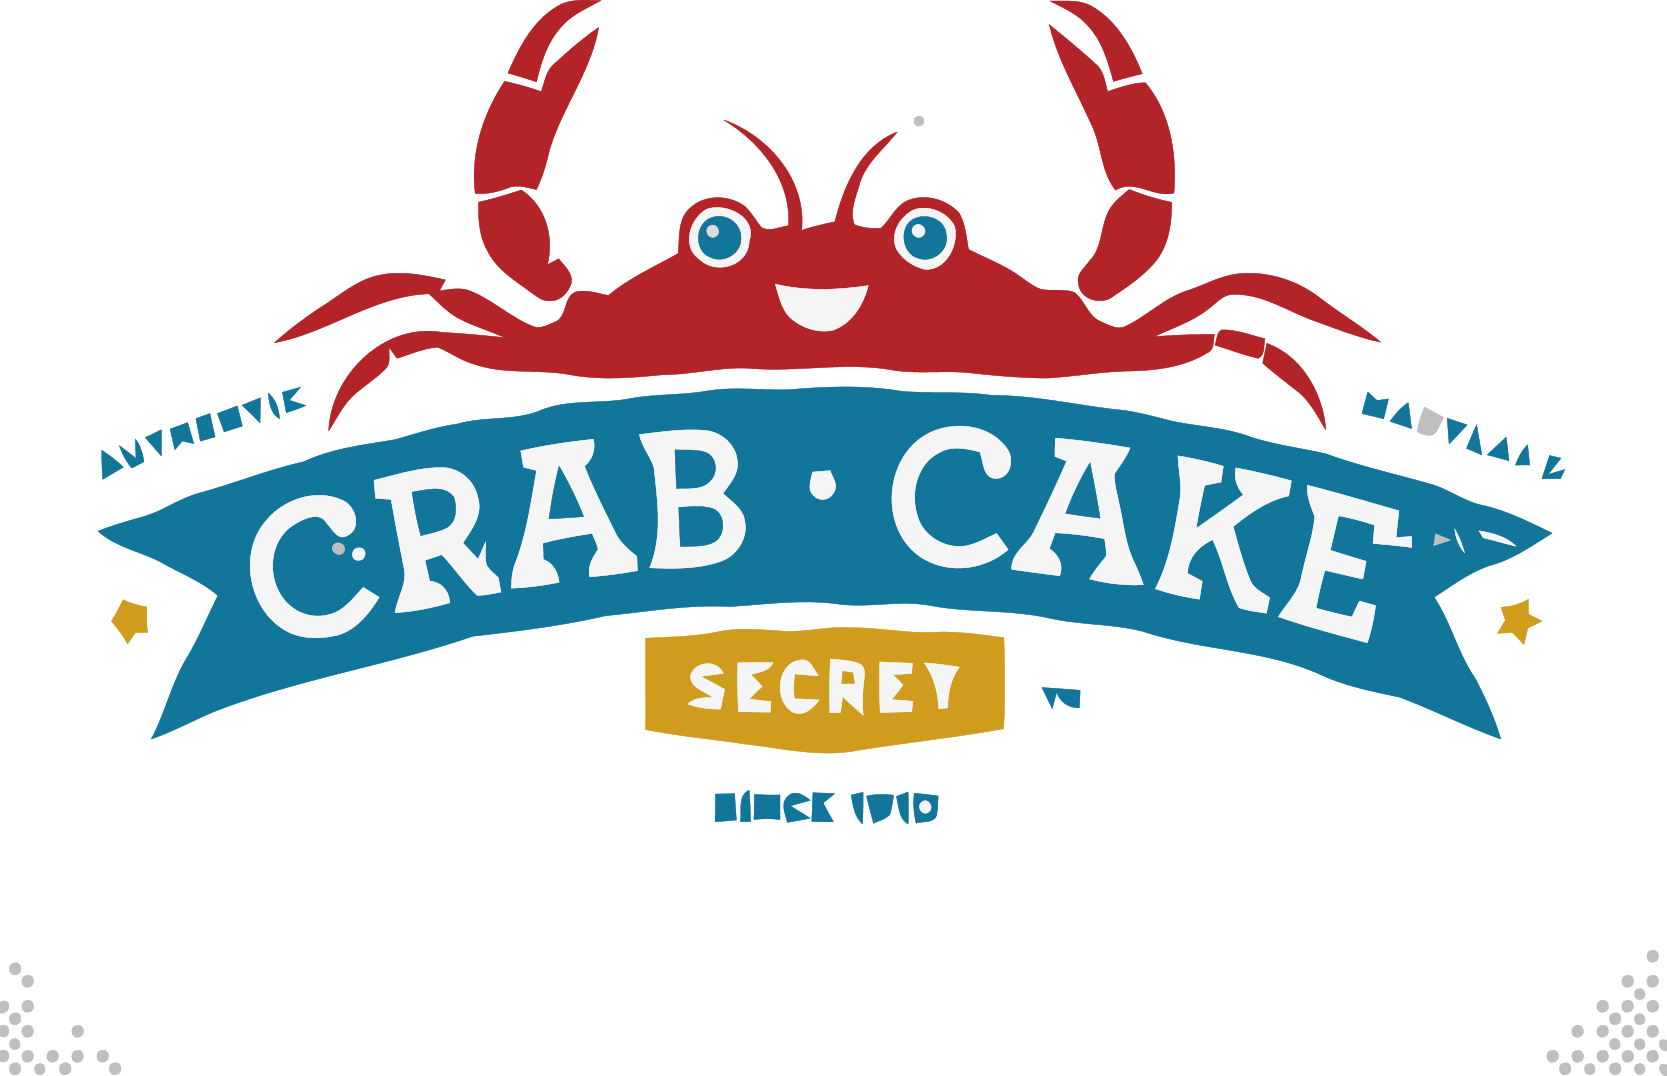 Cake Logo Seafood Crab Restaurant PNG Image High Quality Clipart